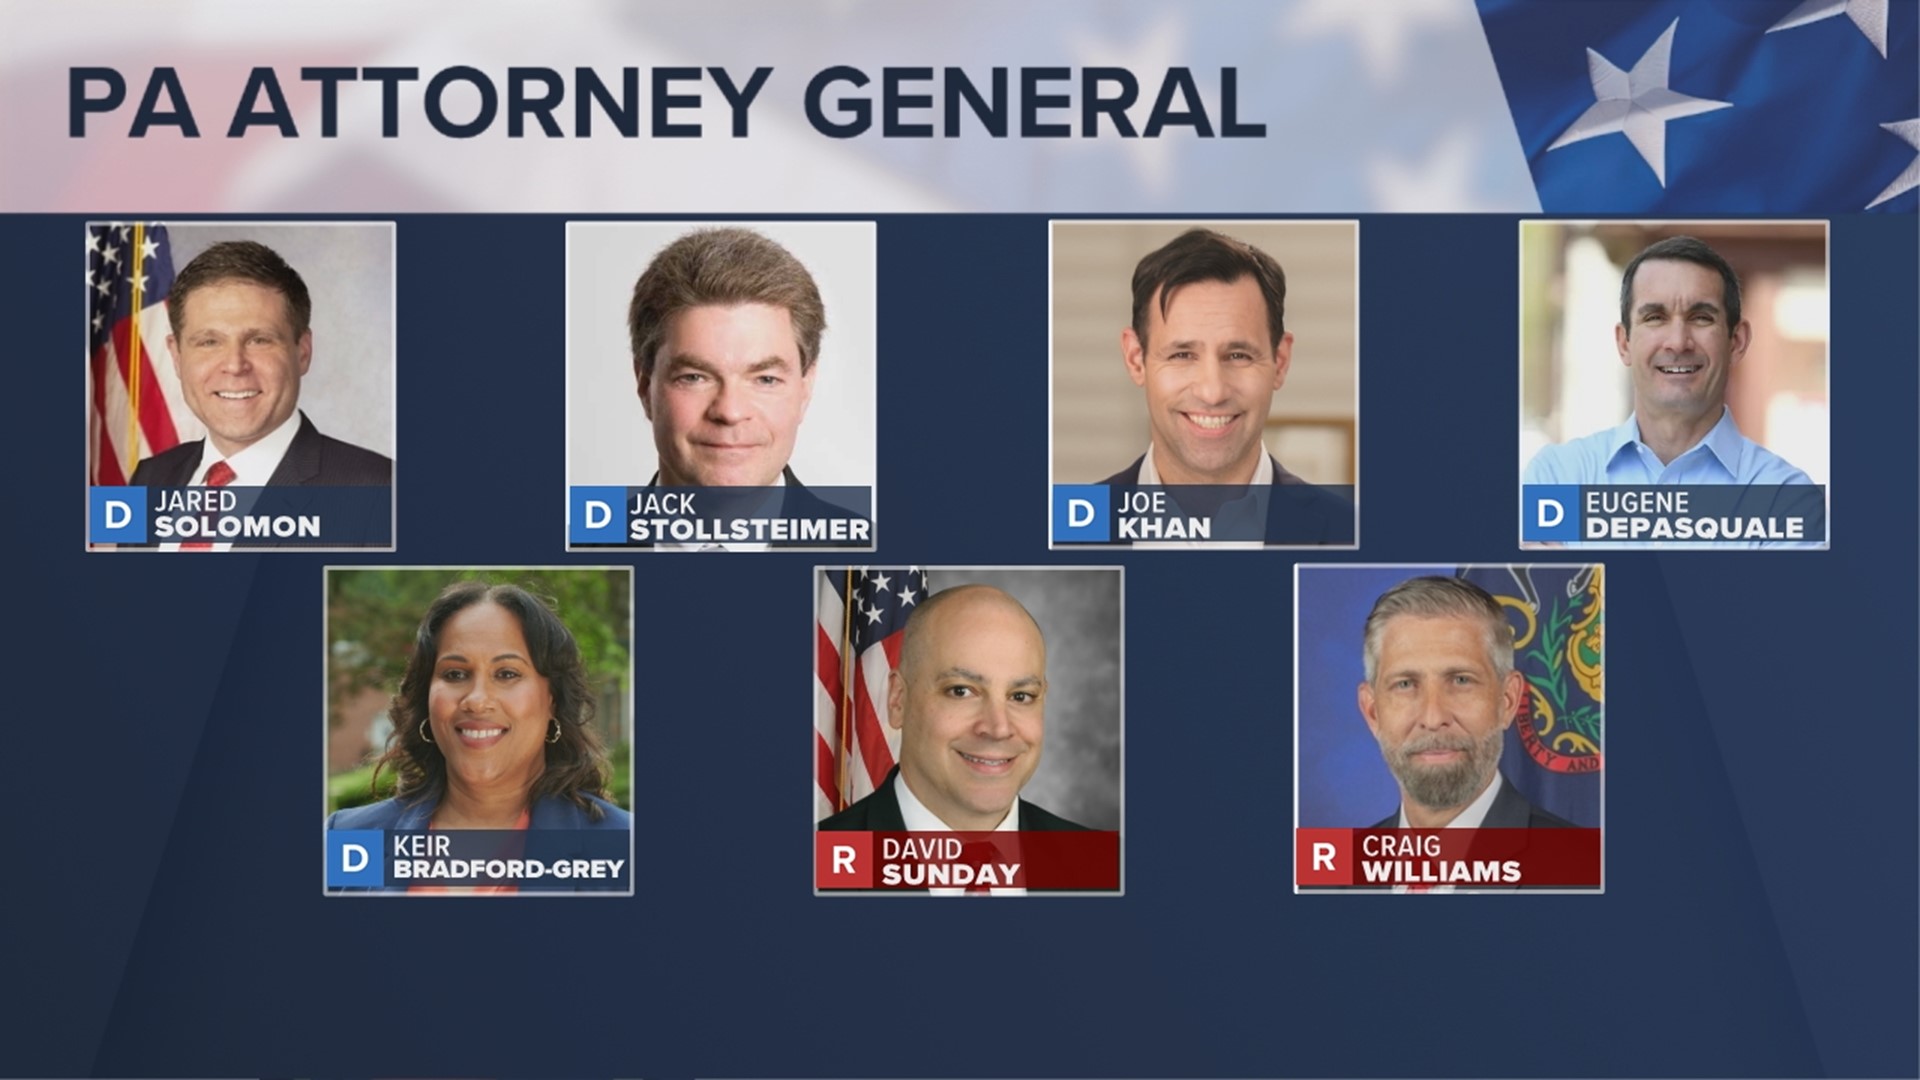 The race for Pa. Attorney General is a crowded field of Republicans and Democrats.